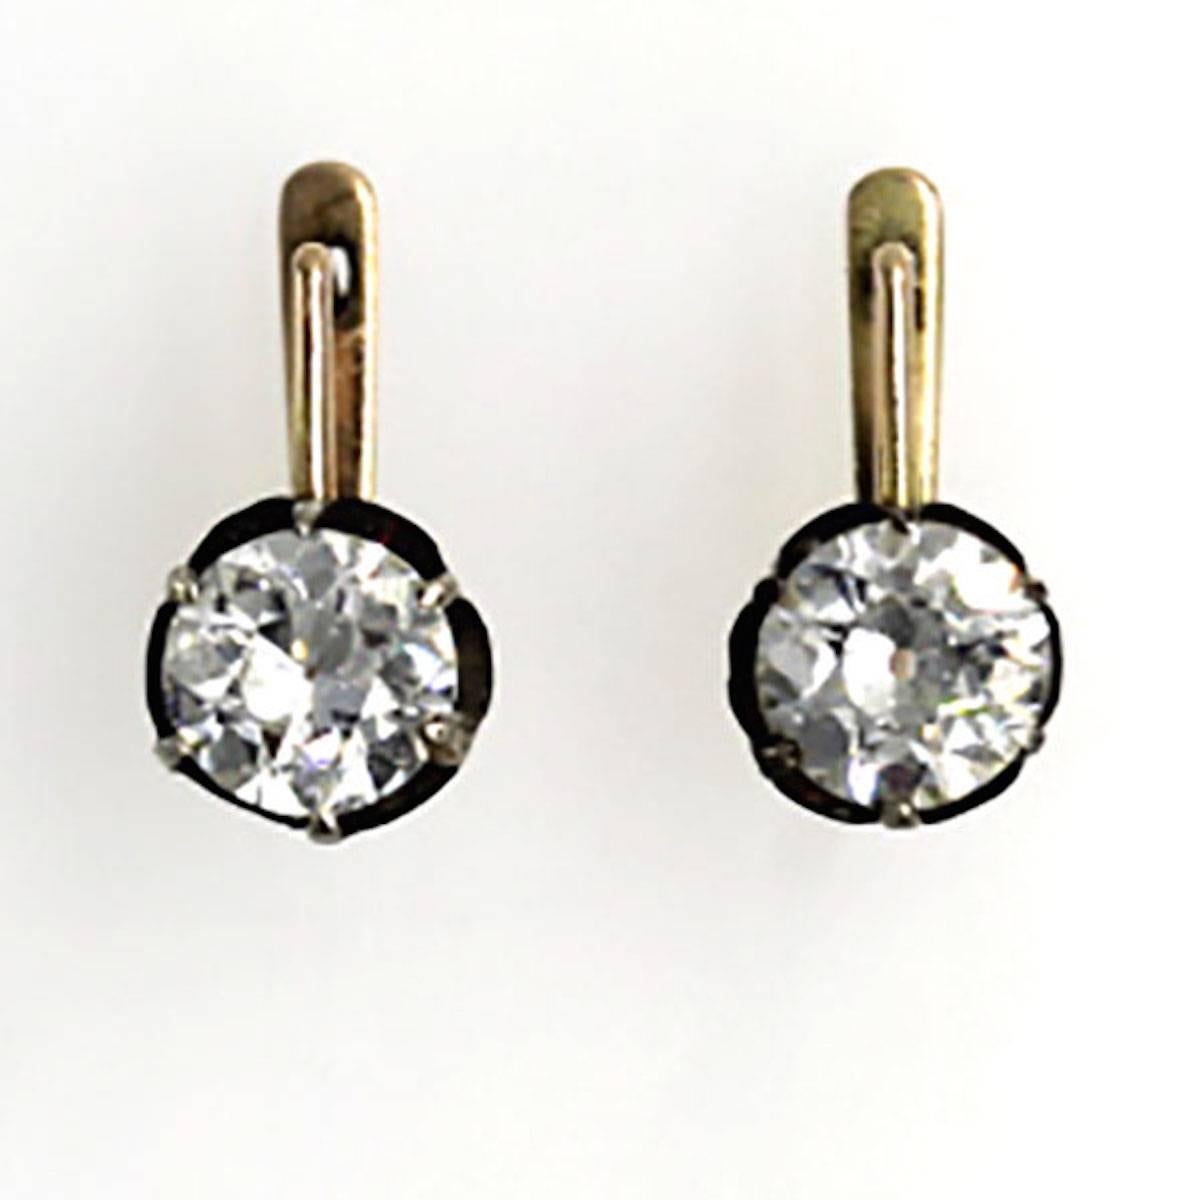 These rare and original diamond earrings from the Victorian Era feature two Old European Cut diamonds equaling 3.14 carat total weight. The diamonds are well matched and are approximately N color, and SI1 clarity. A silver piping surrounds the